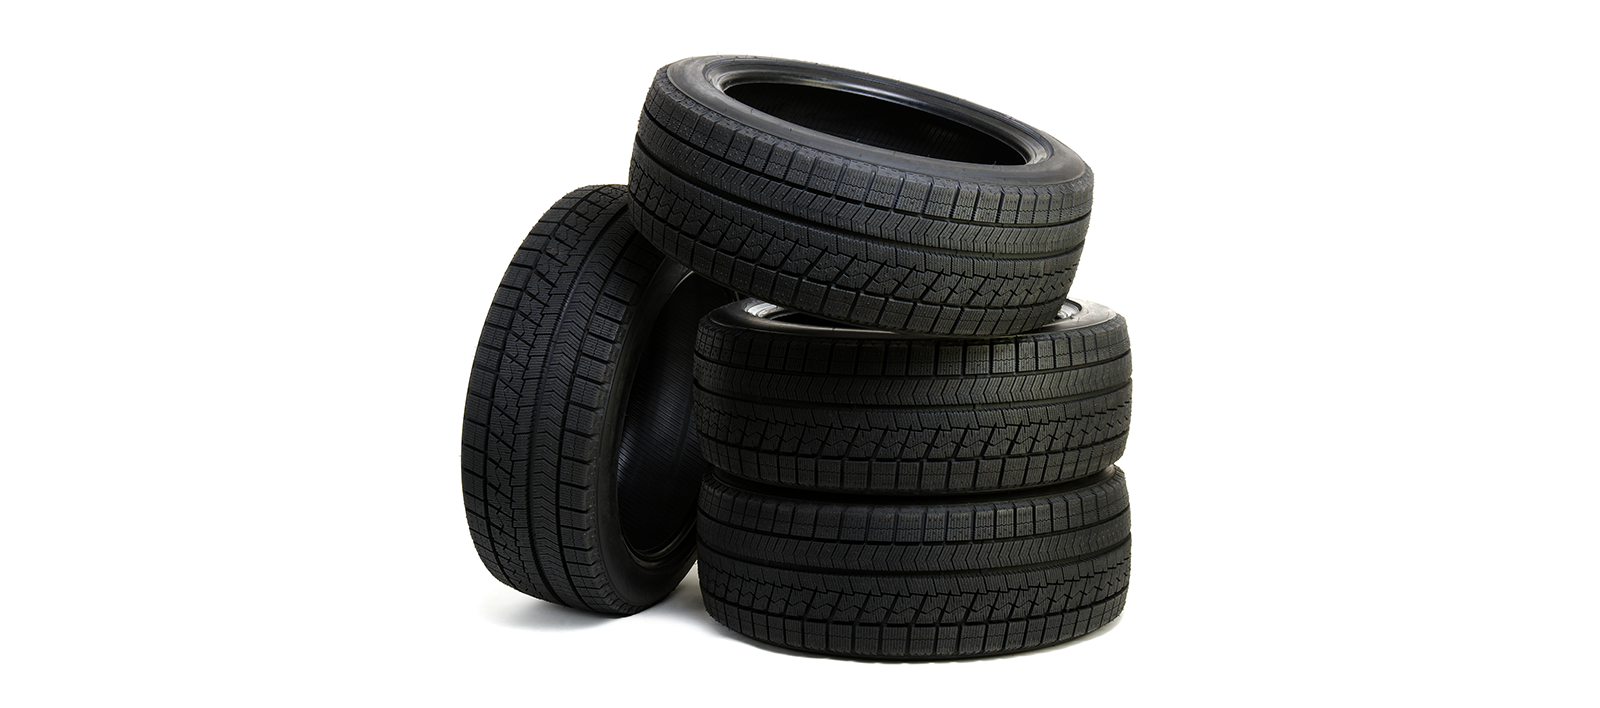 Image How To Read Car Tire Sizes?